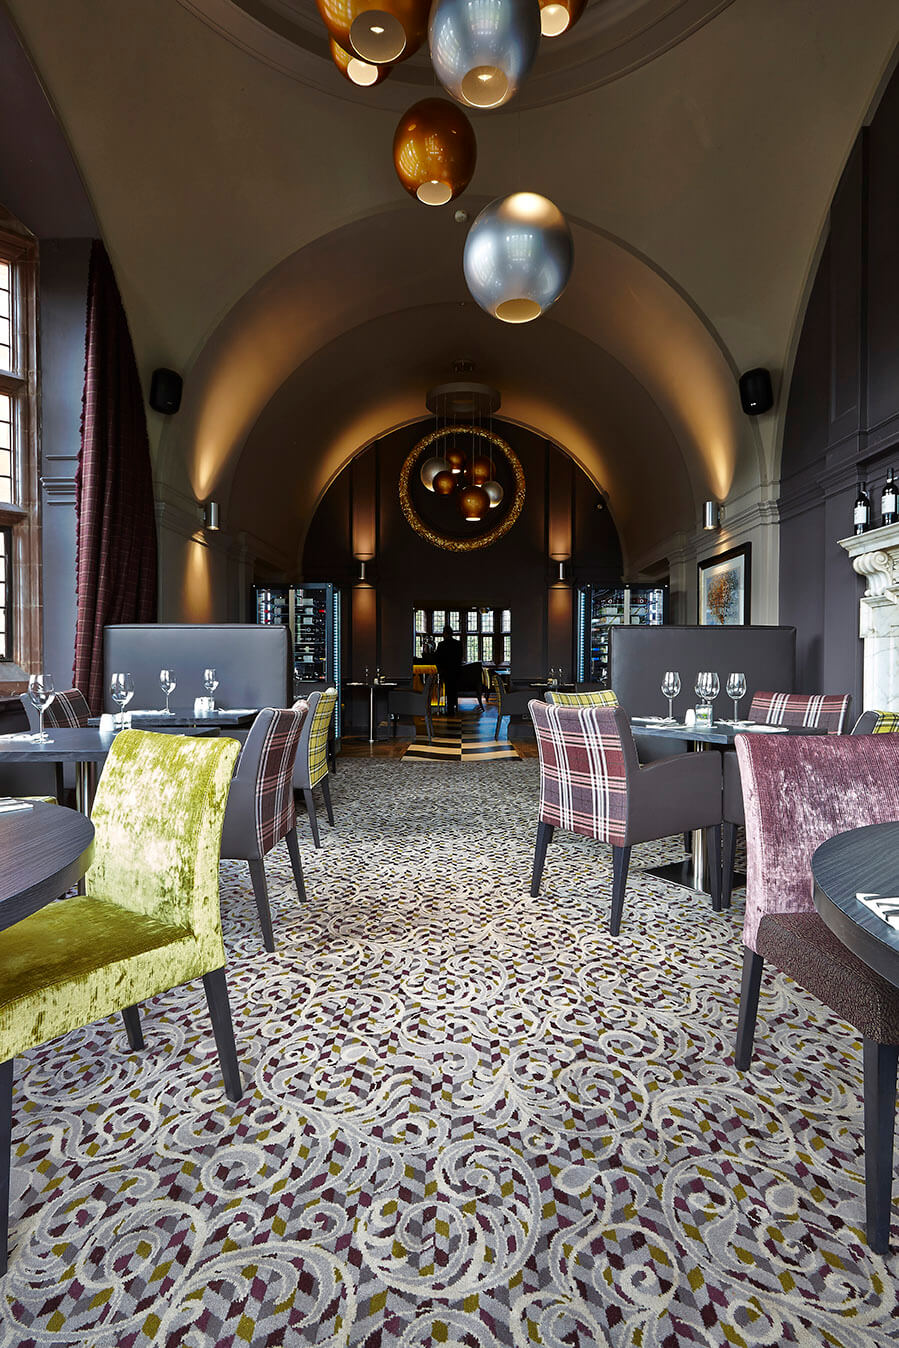 Abbey House Hotel bespoke restaurant carpet, with grey and cream floral patterns, designed by Wilton Carpets